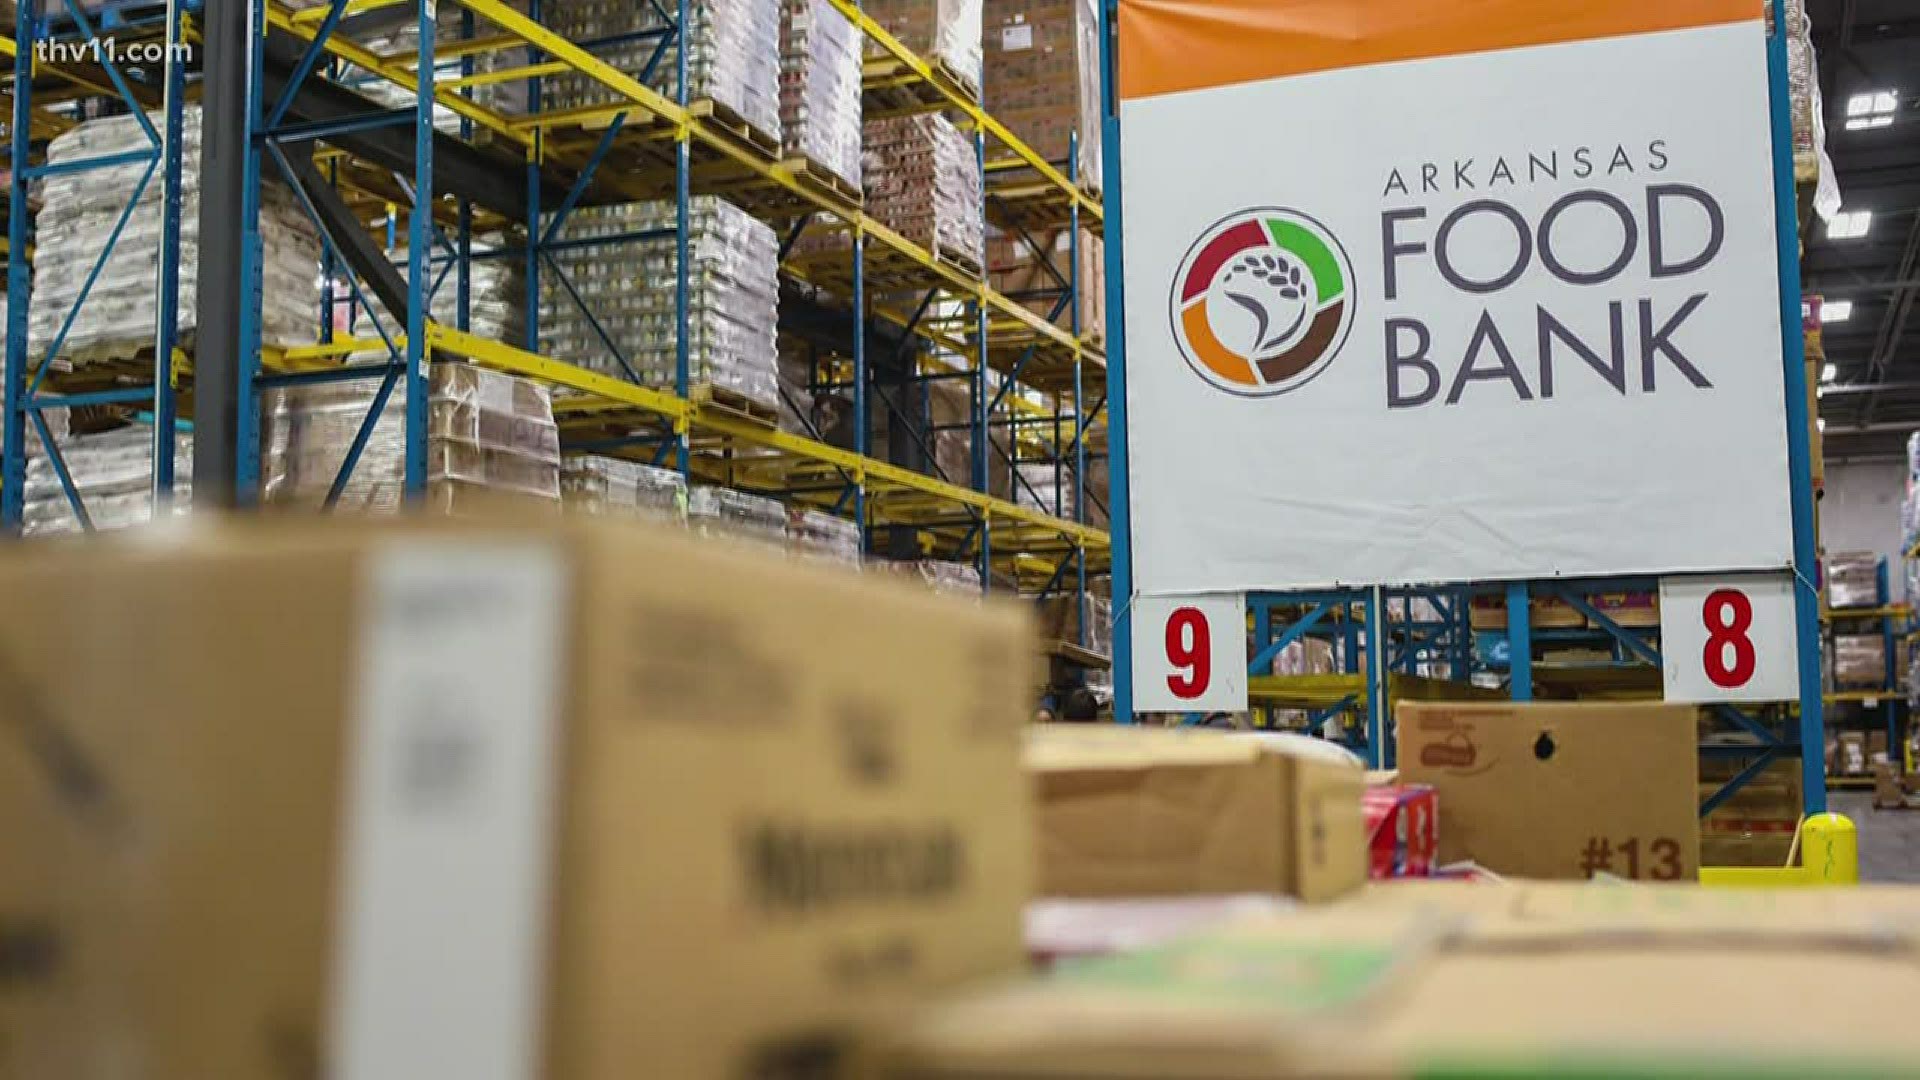 The Arkansas Foodbank is paying laid off or furloughed restaurant and service industry workers to help box food.